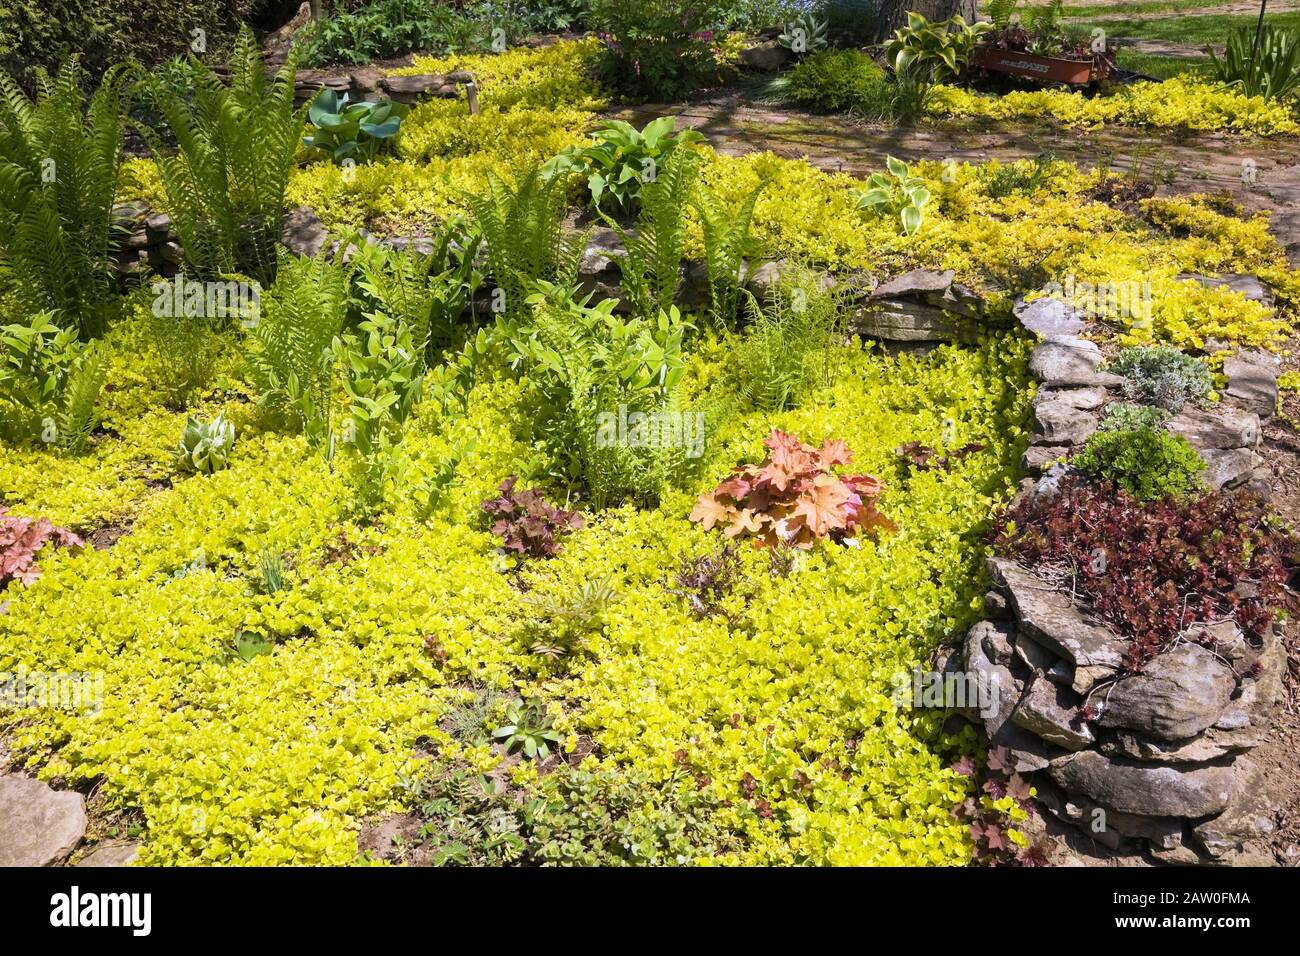 Rock edged border with Lysimachia nummularia ‘Aurea’ -  Golden Creeping ‘Jenny’ and Pteridophyta - Fern plants in backyard country garden in spring Stock Photo